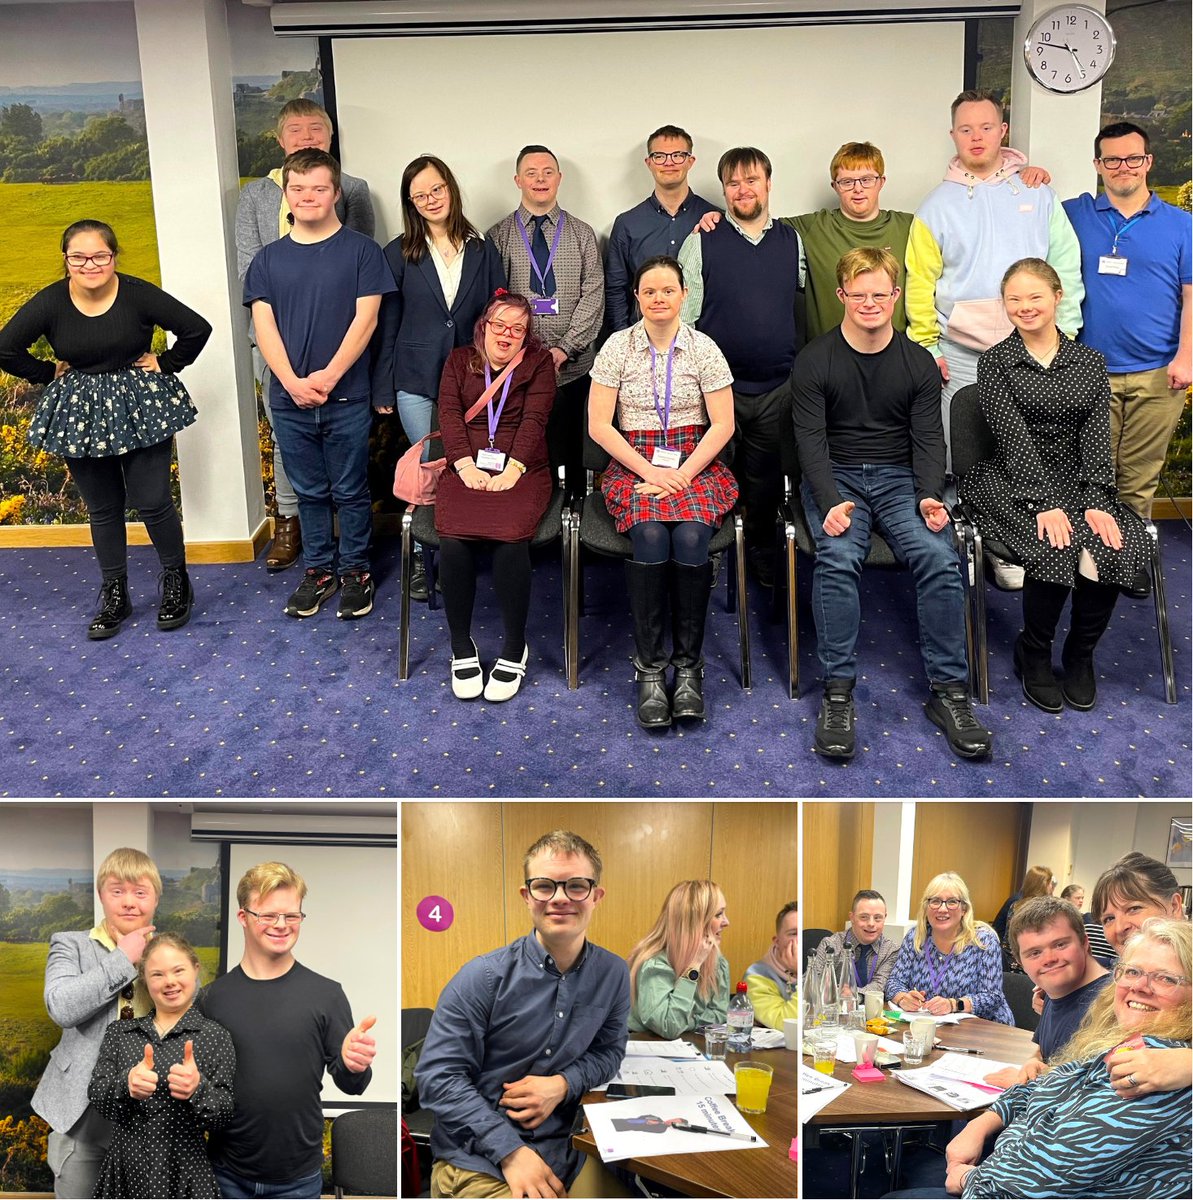 PDSA members Jake, Aaron & Max joined with their @NDSPolicyGroup friends @DHSCgovuk to share experiences & help shape the #DownSyndromeAct Guidance. Inclusion at heart of decision-making. @LiamFox @mariacaulfield @victoriaatkins #WithUsNotForUs @rachaelross21 @kenross2011